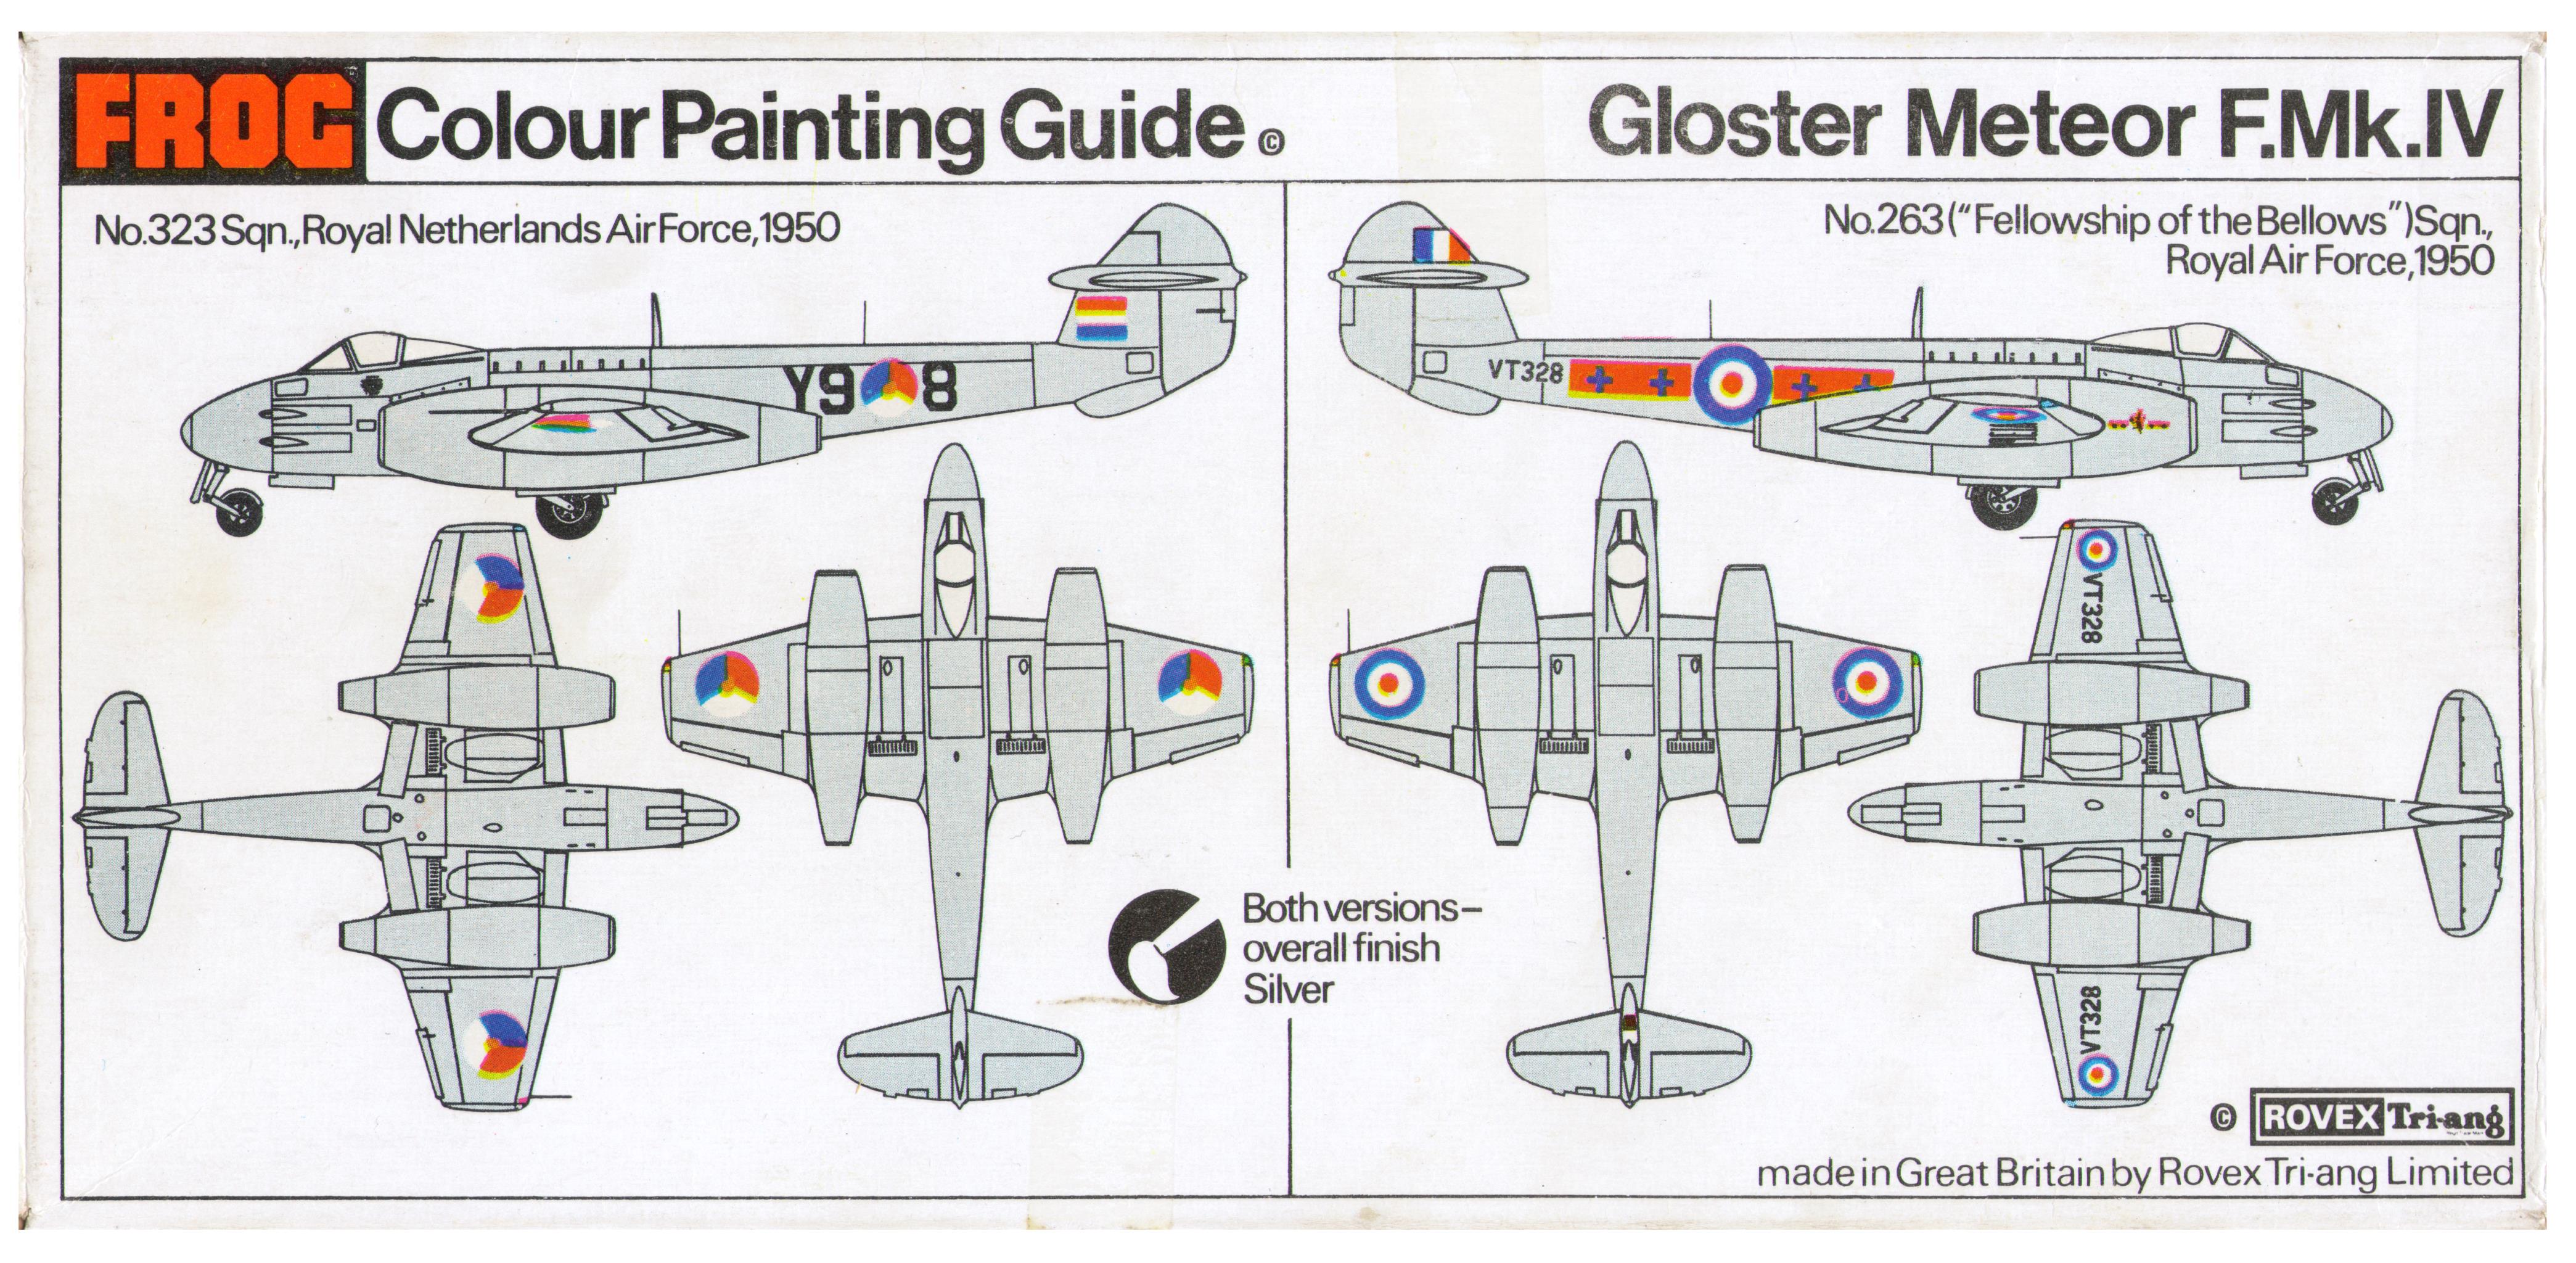 FROG F200 Gloster Meteor F.Mk.IV Interceptor fighter, Colour Painting Guide on the base of the box, 1970